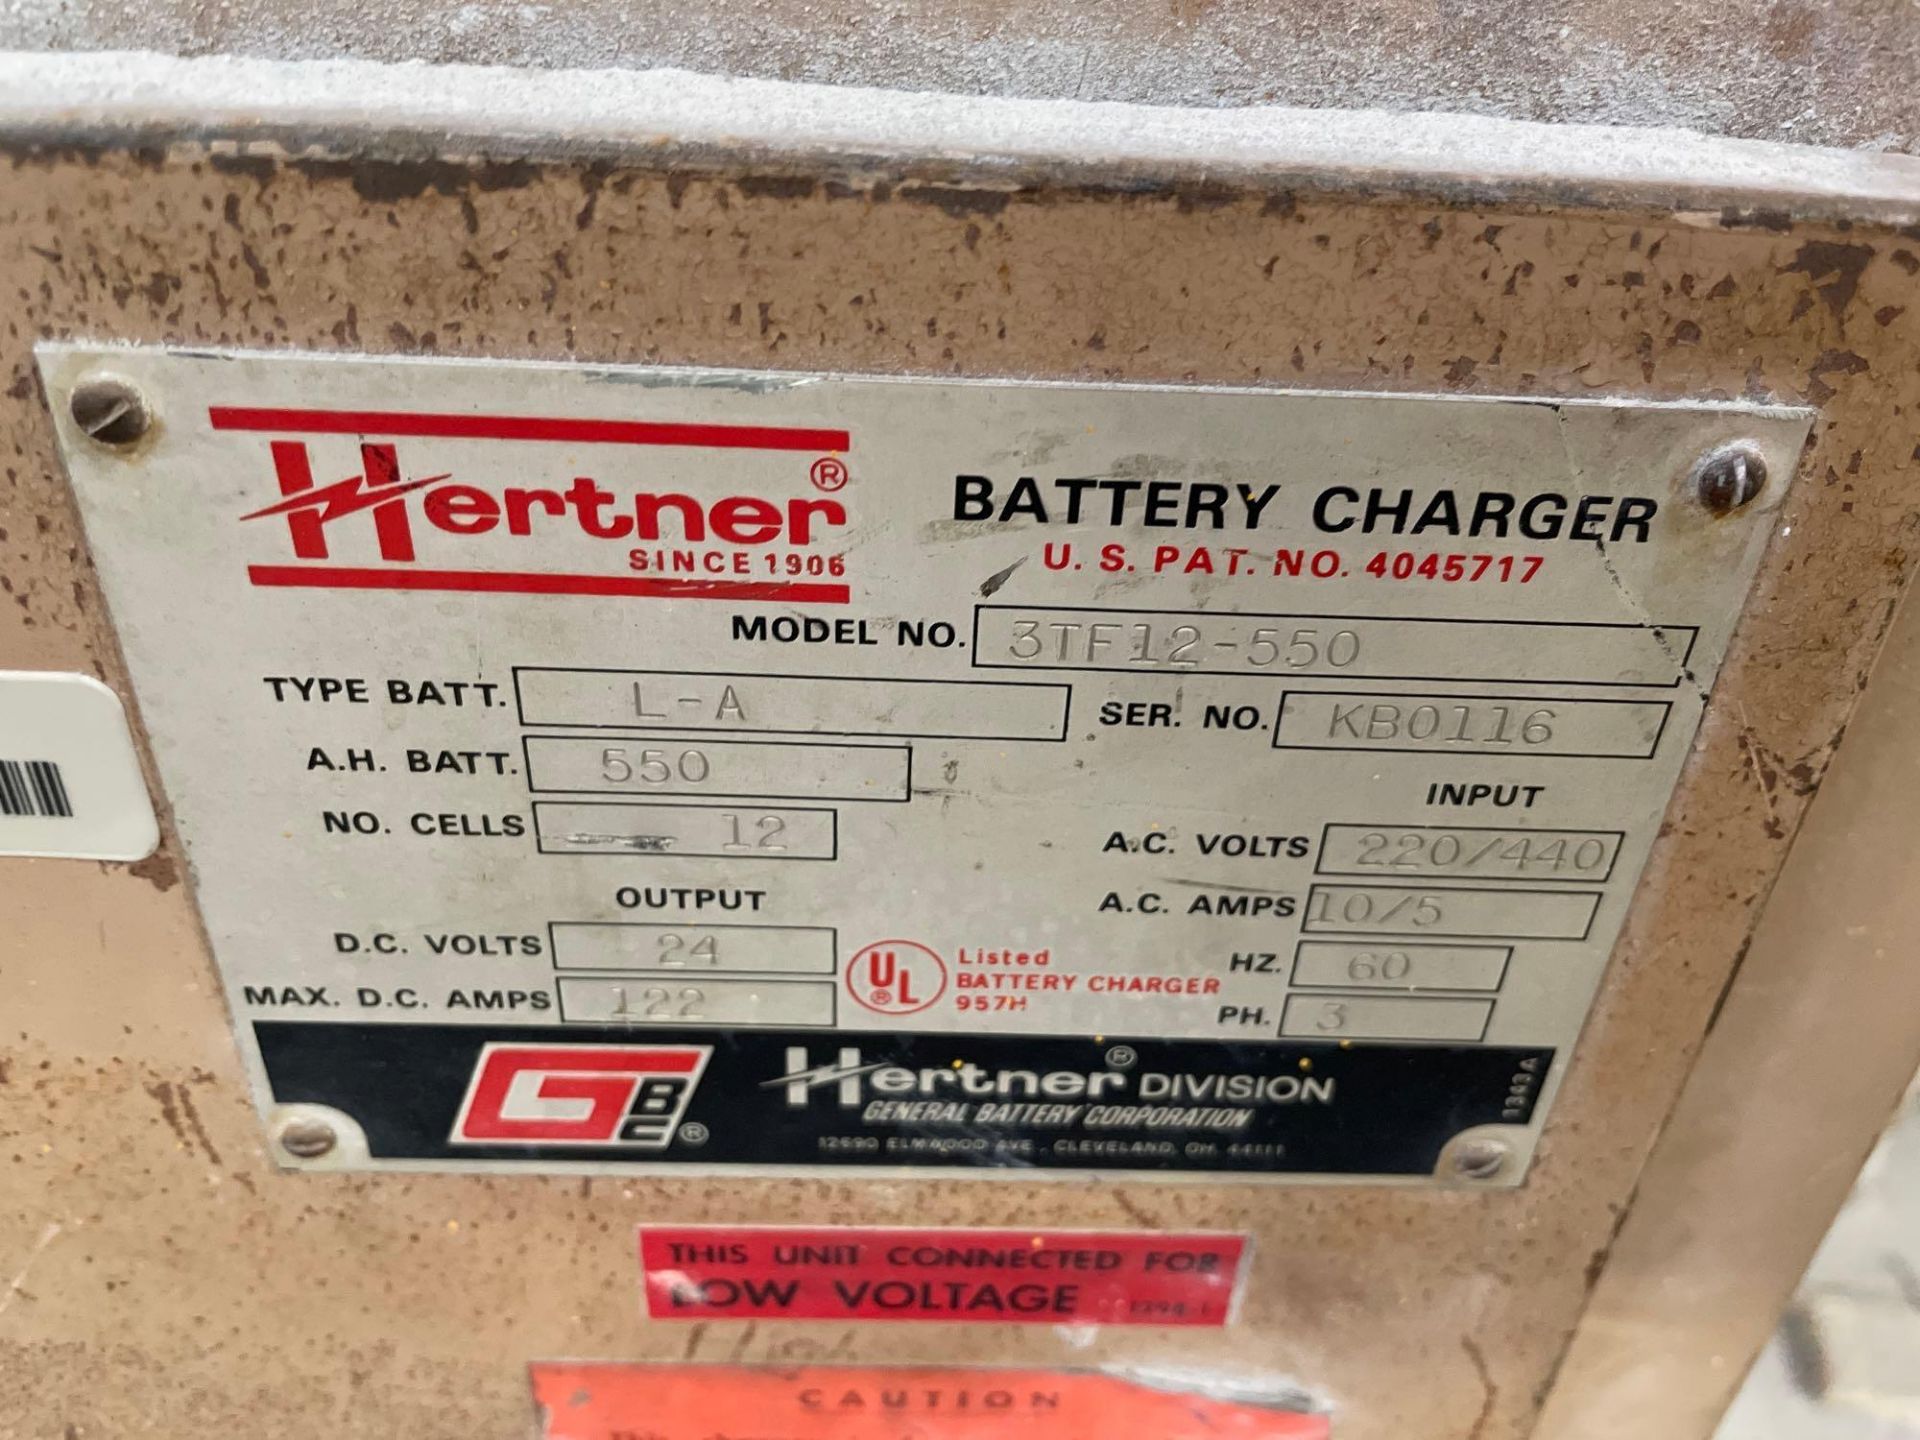 Hertner Battery Charger - Image 5 of 5